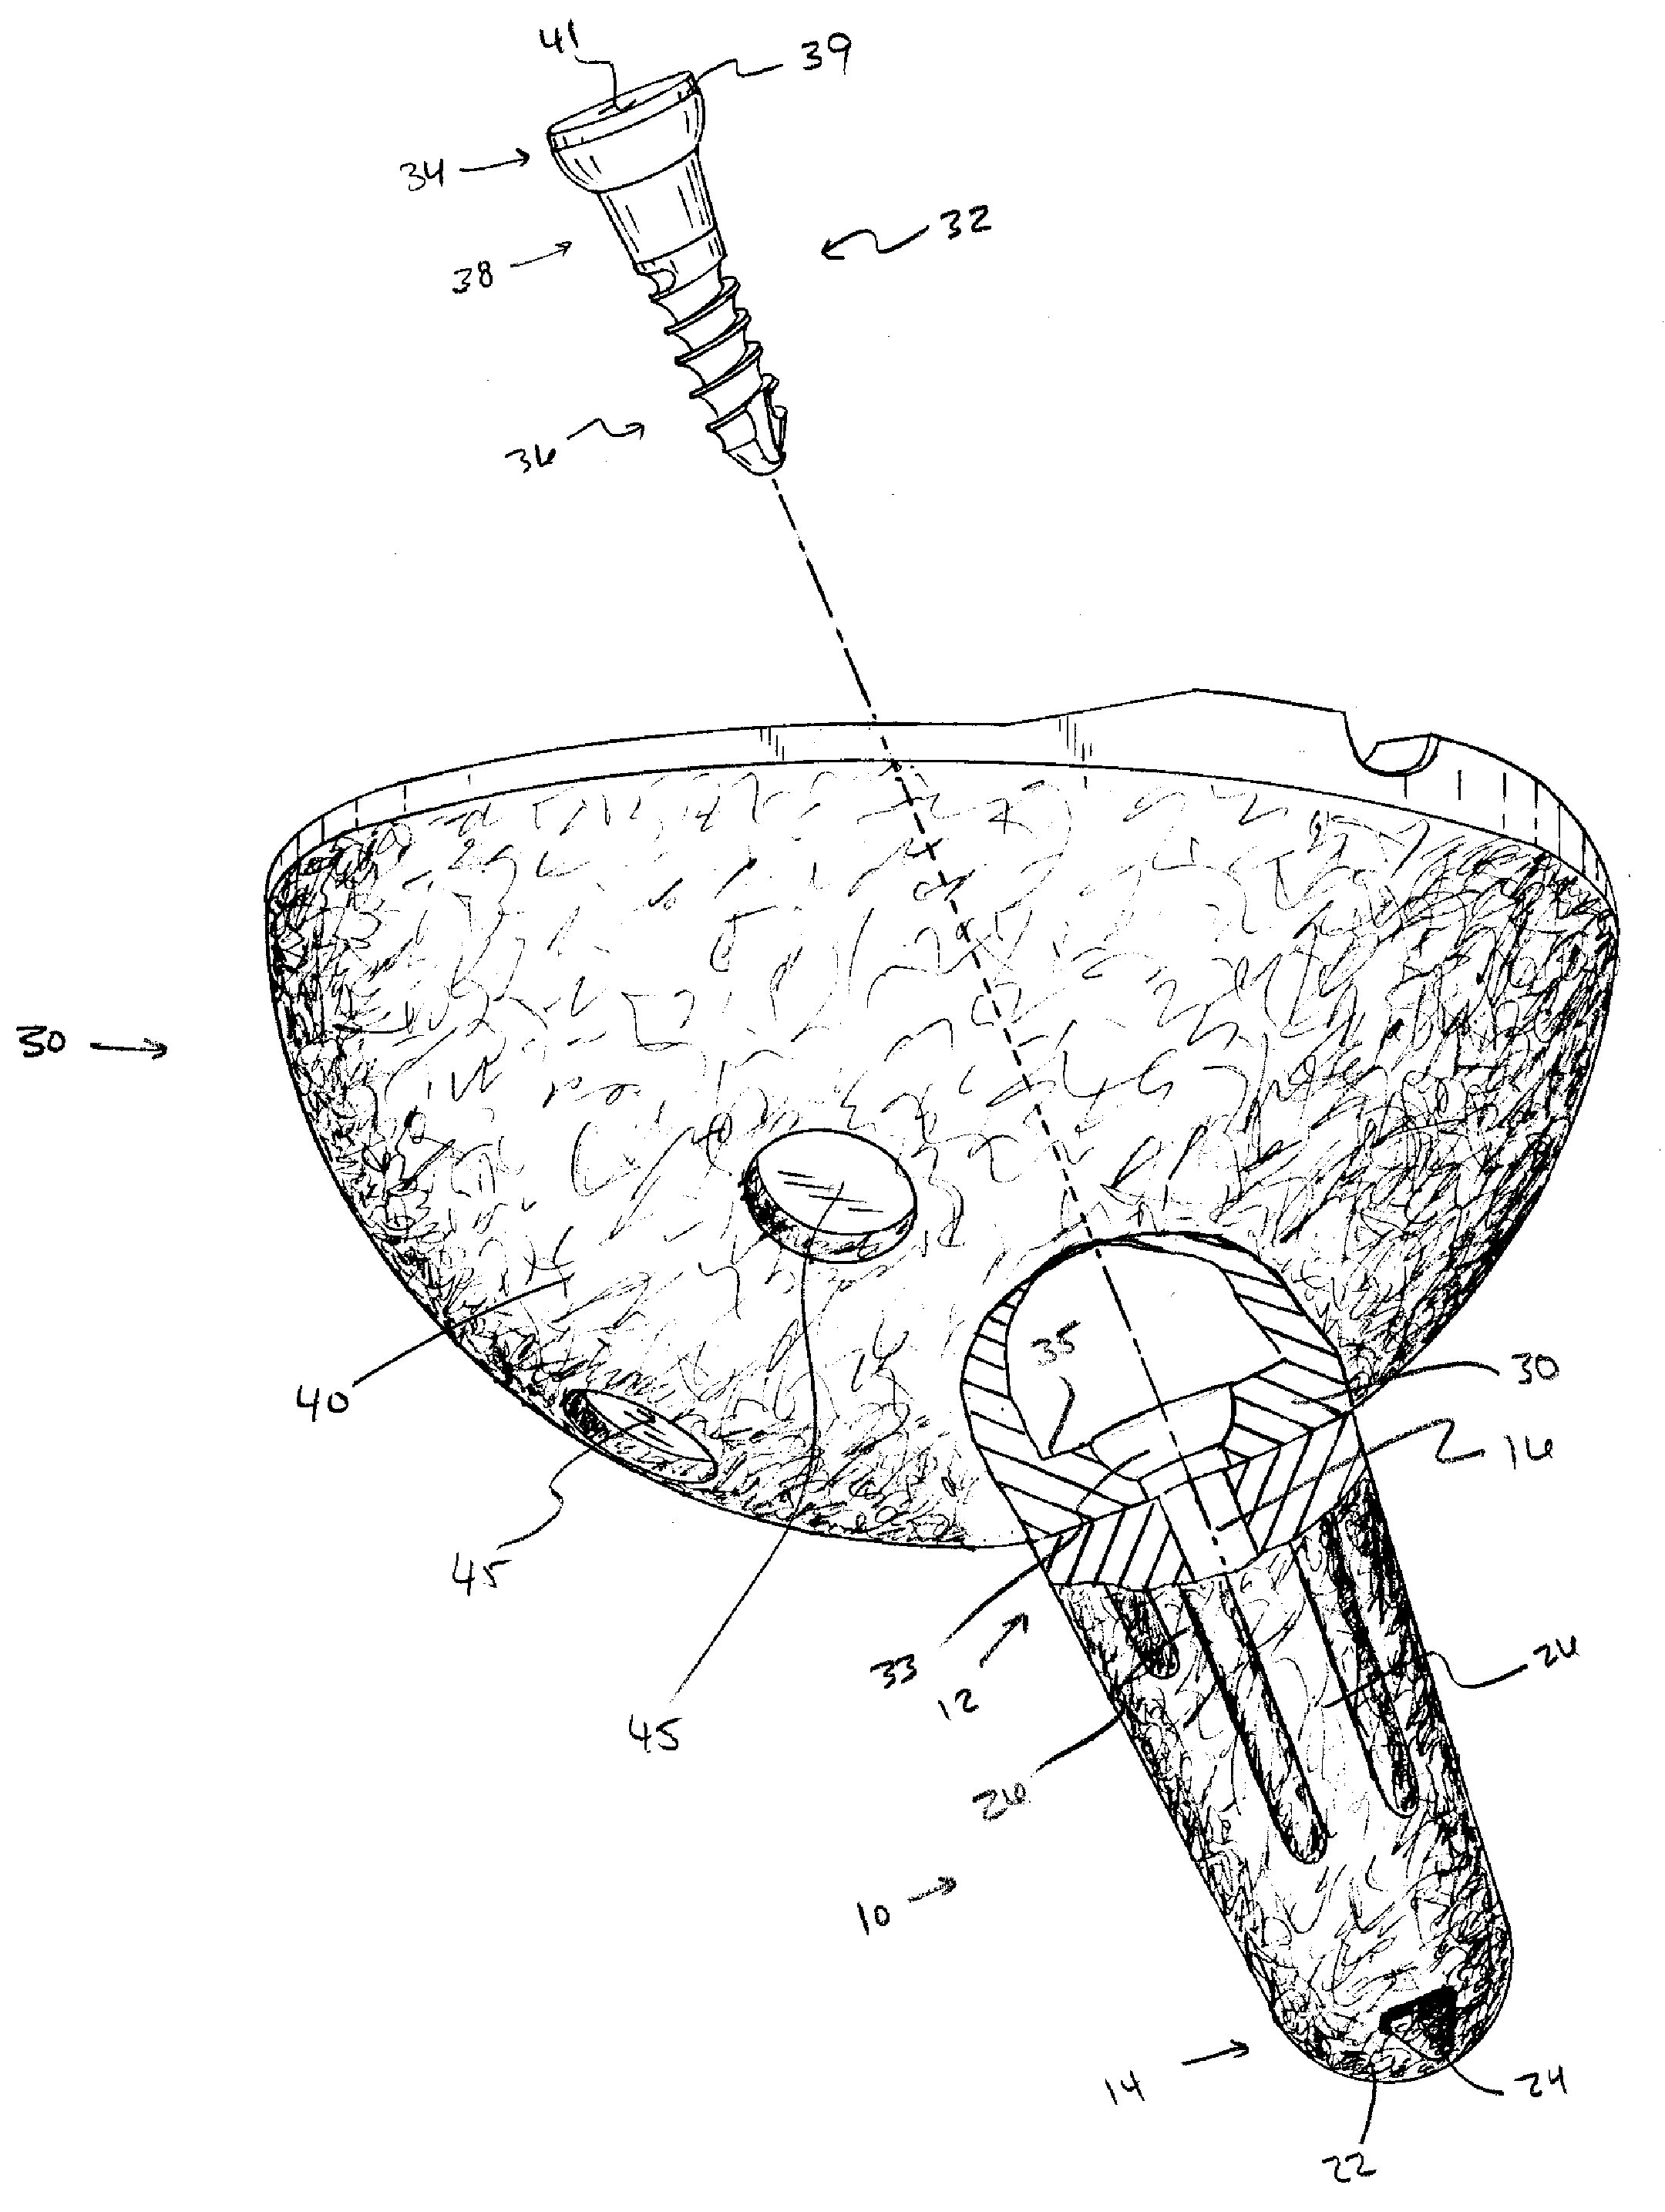 Implant anchoring device